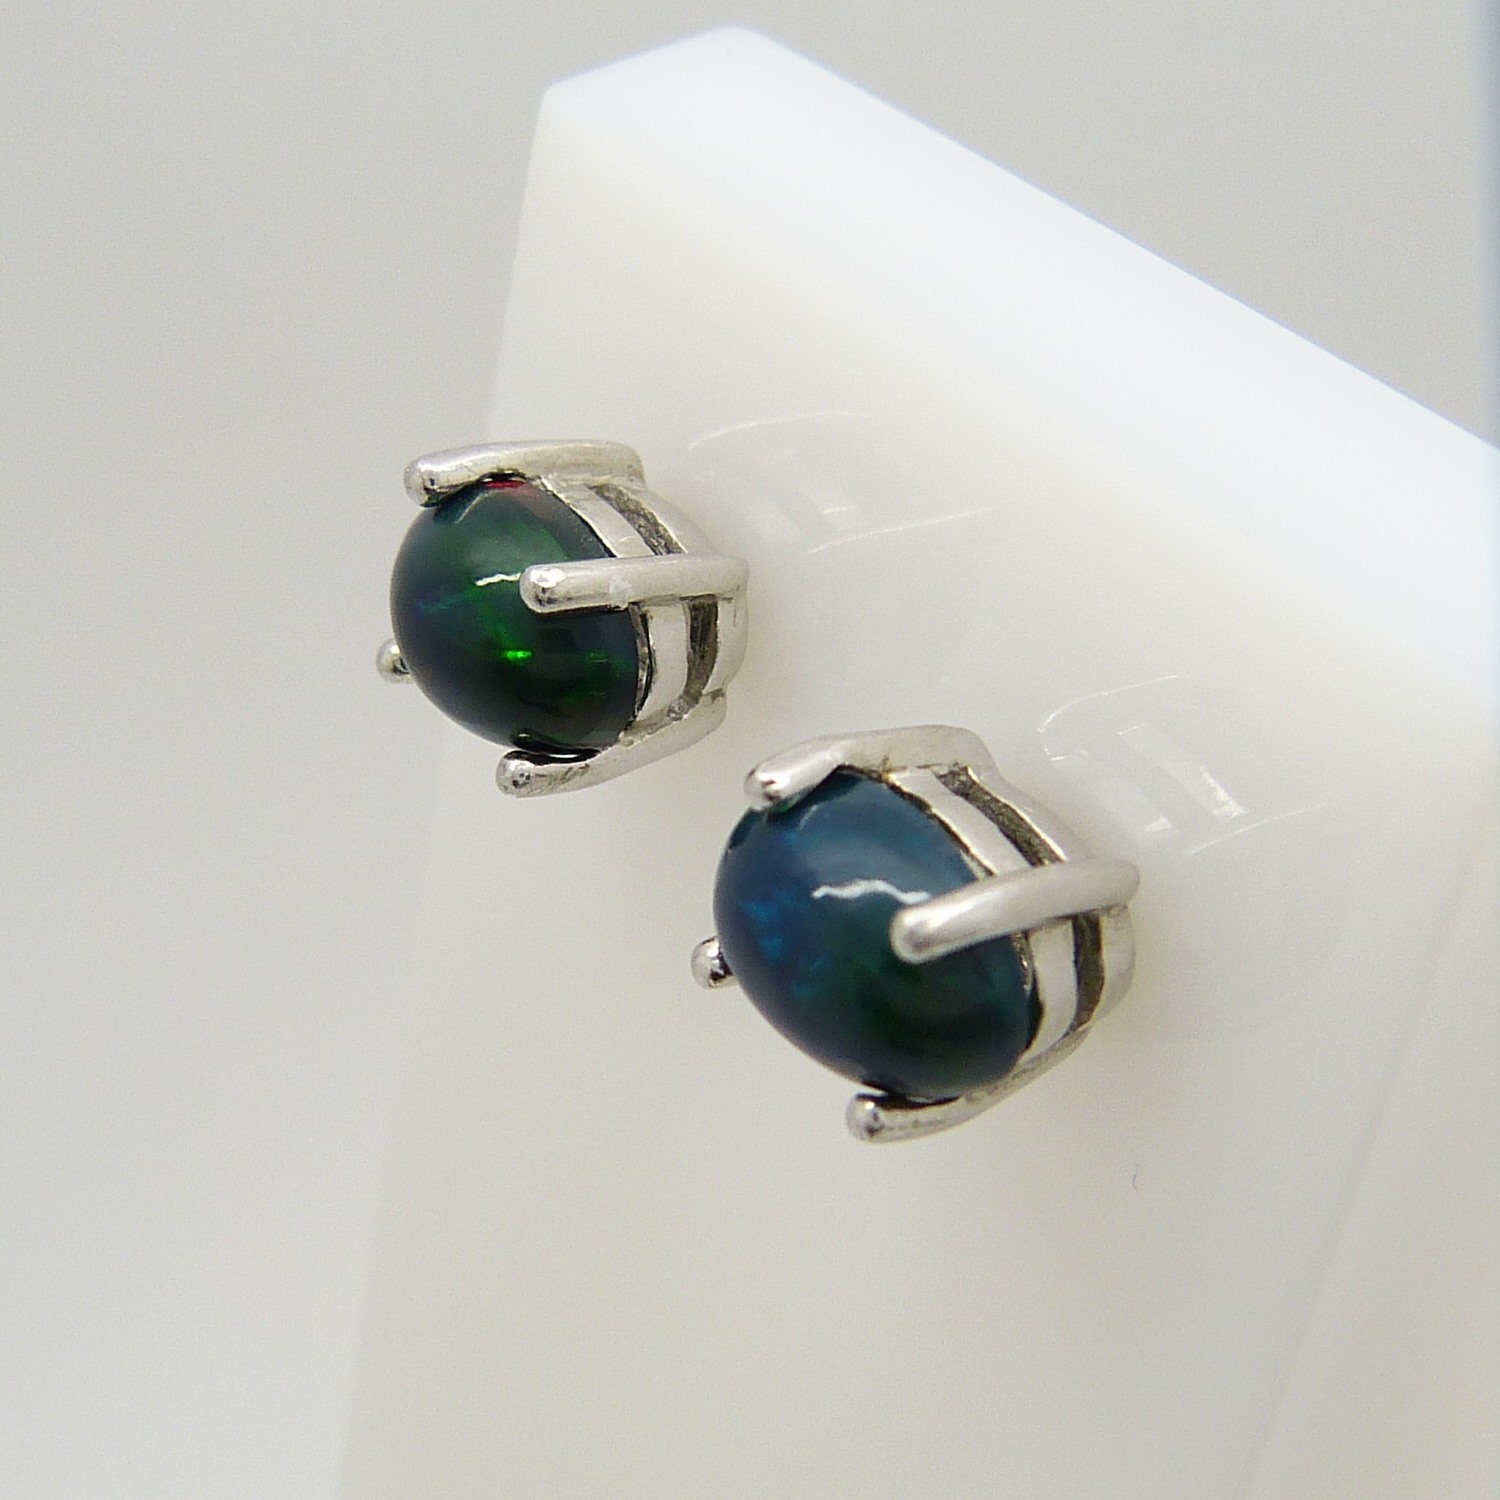 A pair of silver ear studs set with cabochon black Ethiopian opals, 1.10 carats (approx)